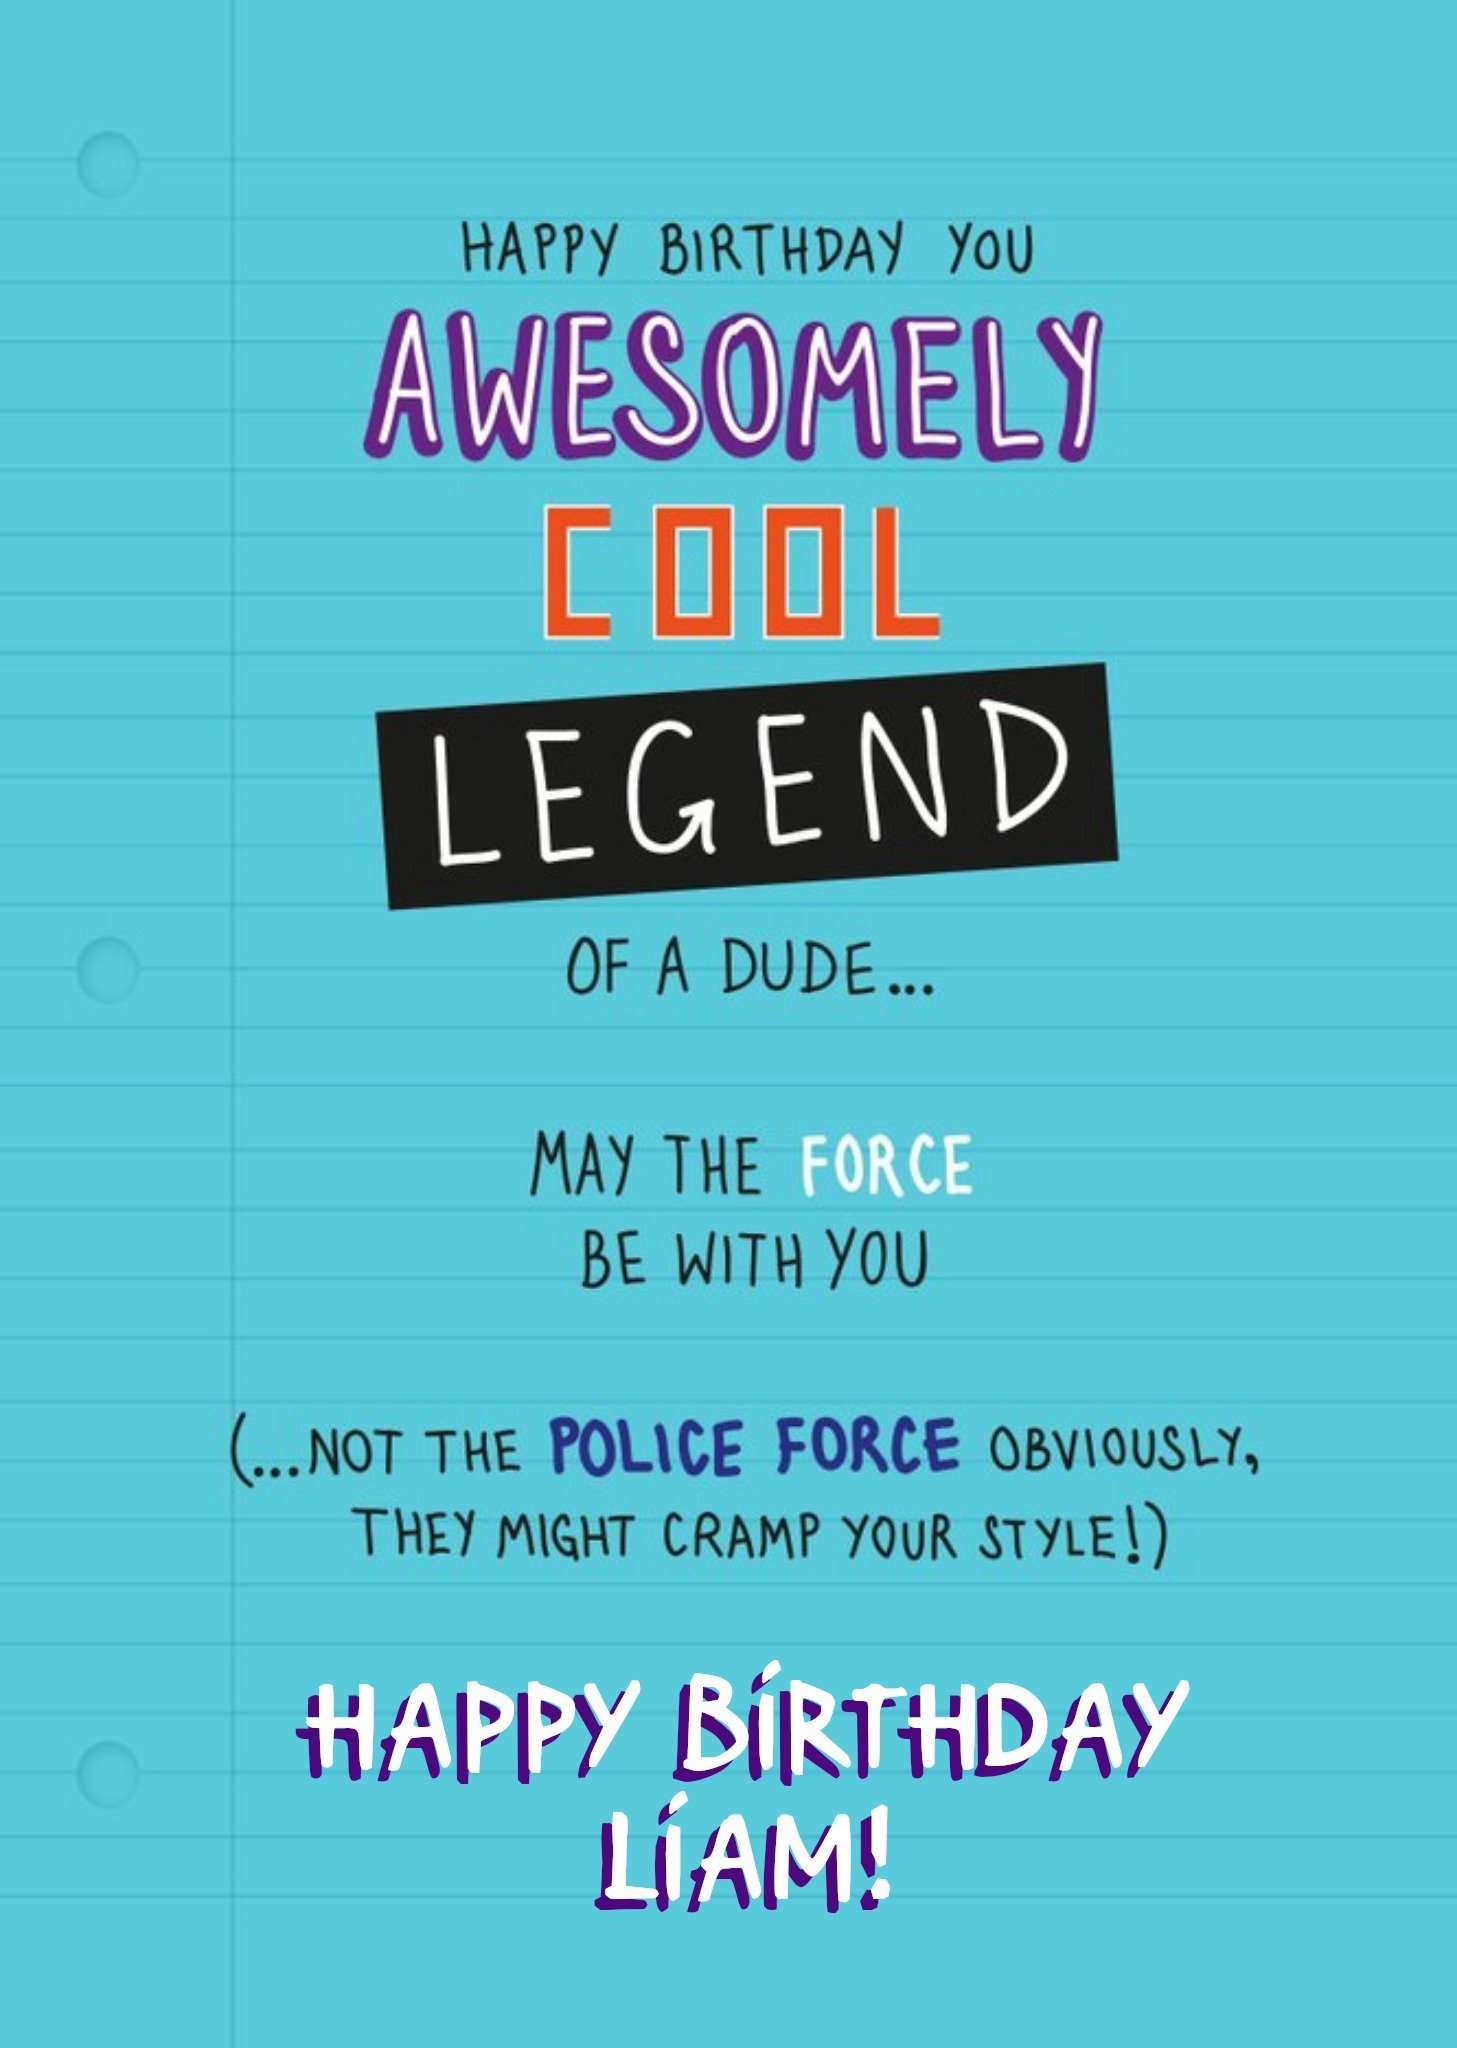 Moonpig Awesomely Cool Legend Of A Dude Personalised Card, Large